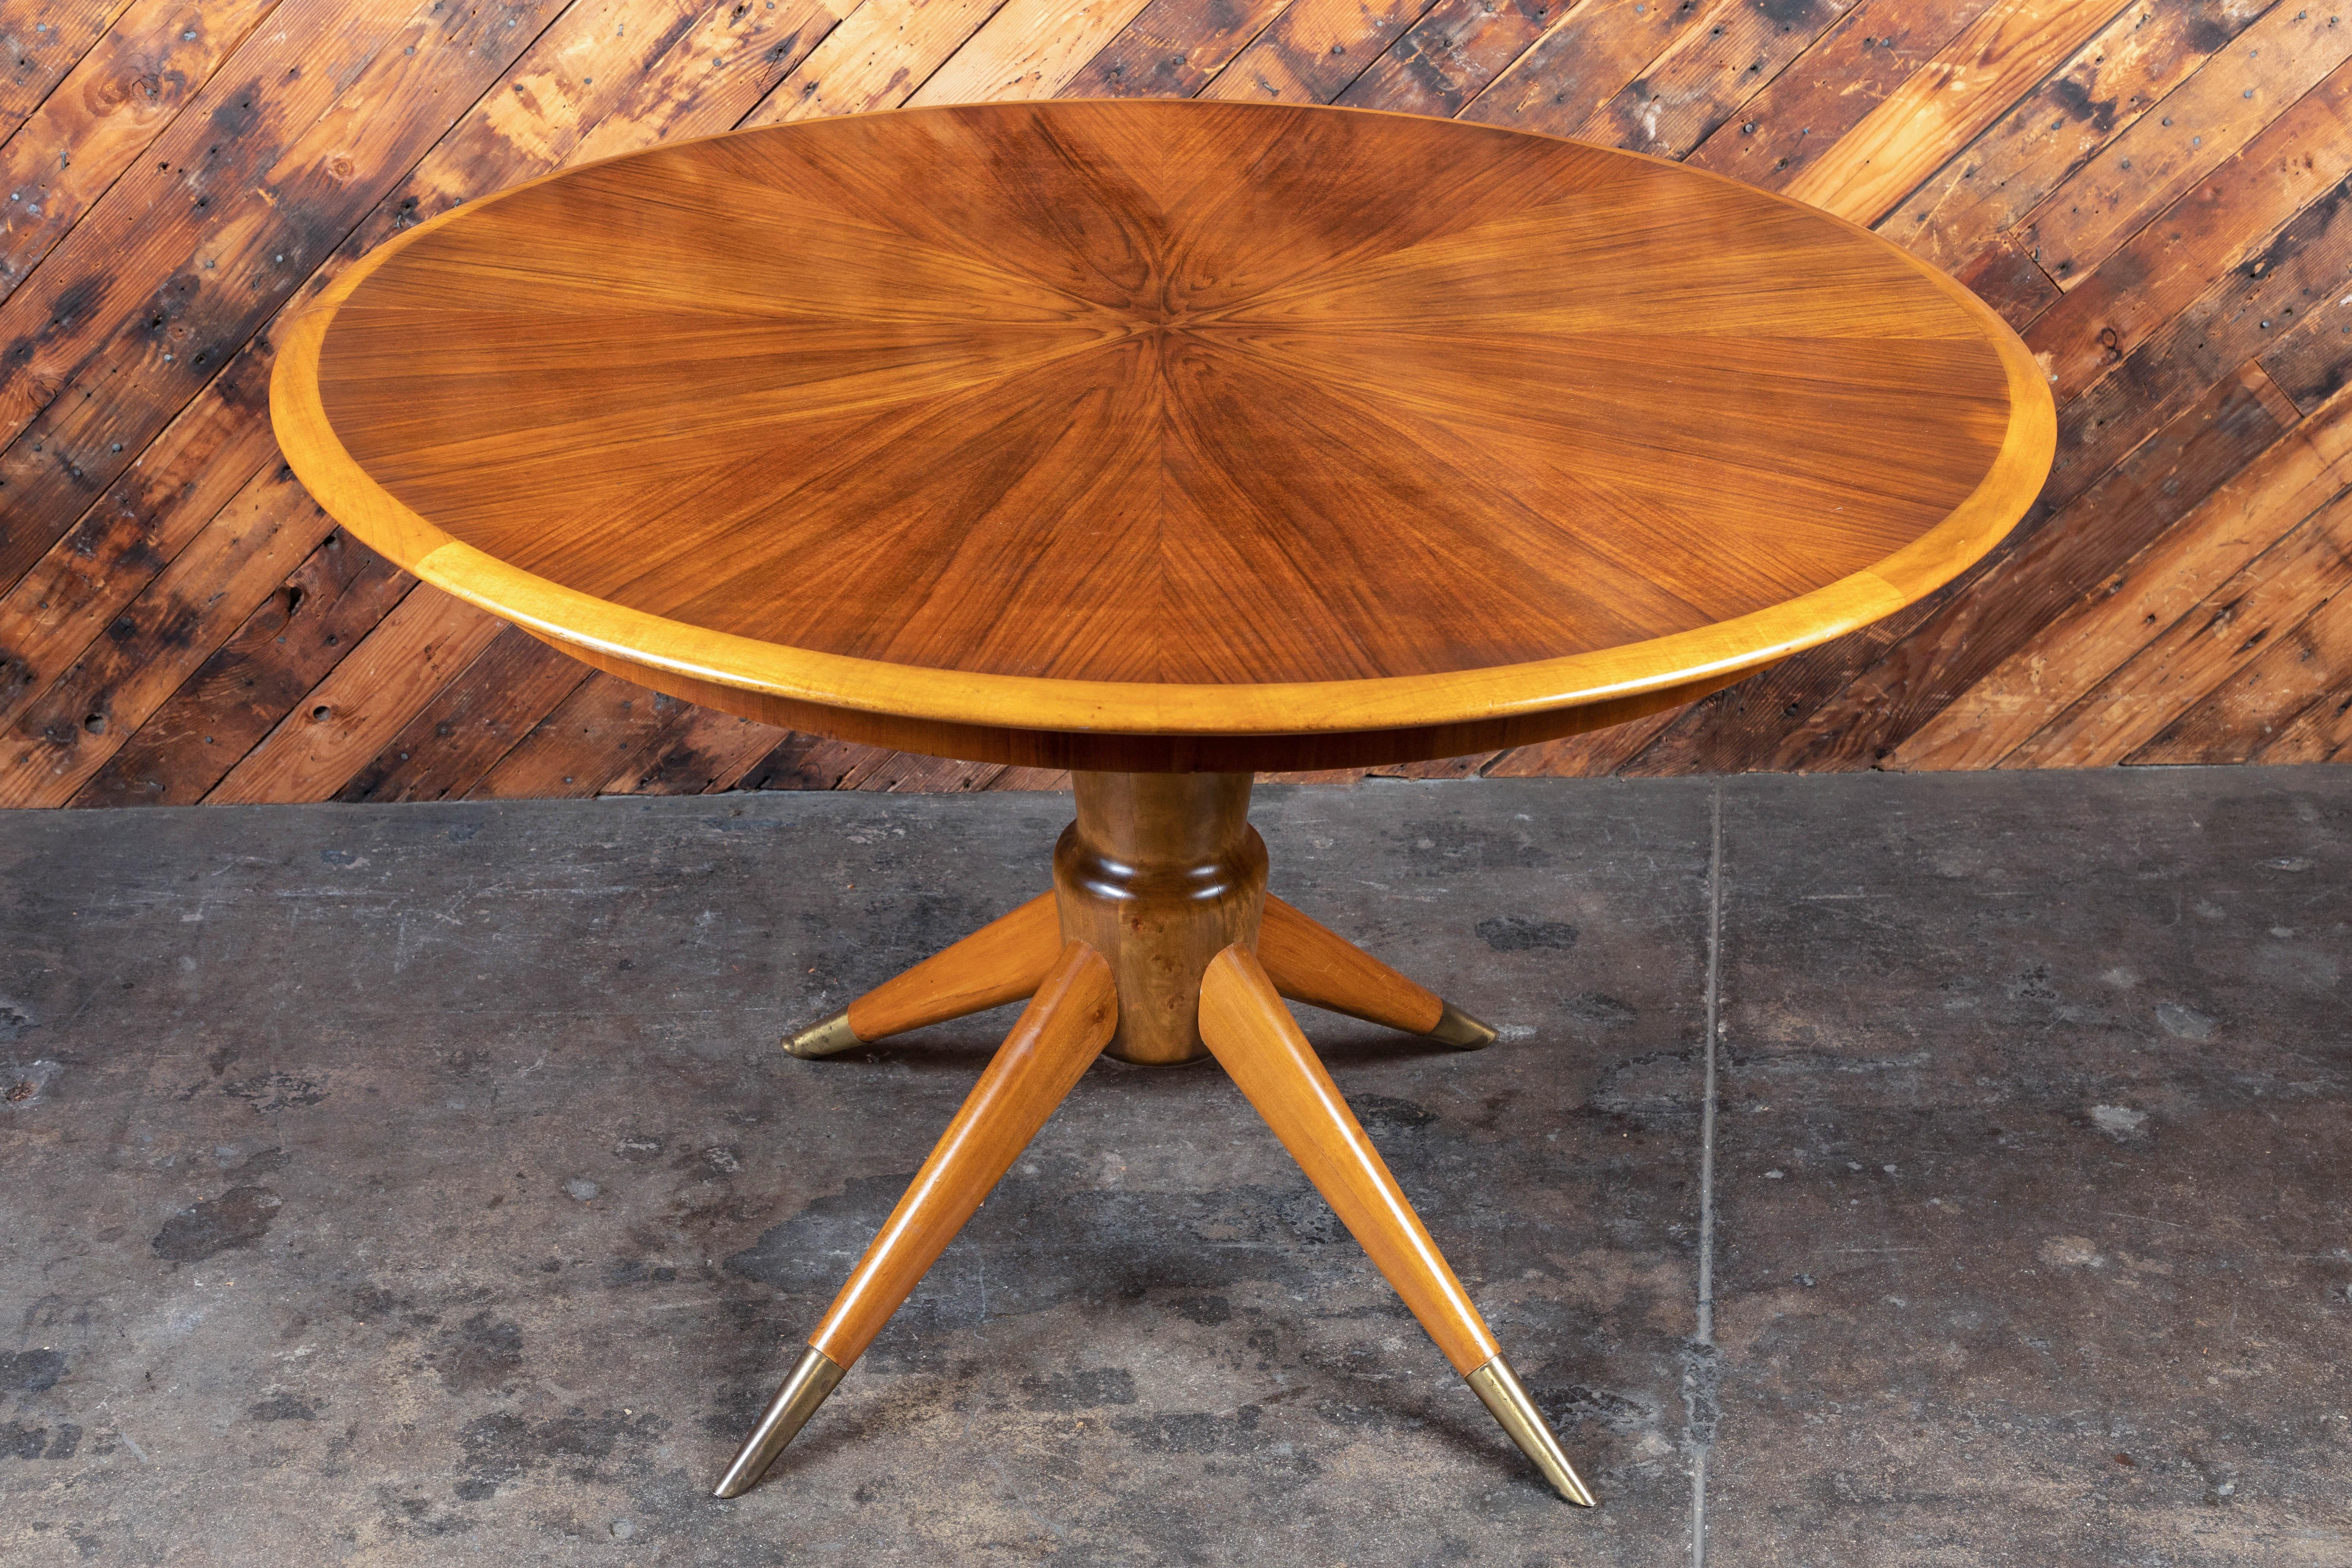 Features pedestal base with long brass tipped feet. Gorgeous grain, extends from round top to long oval with two leaves. Great designed flip down support legs tuck into the table. 

Measures: Diameter 46, height 29

Two leaves: 18 D each.